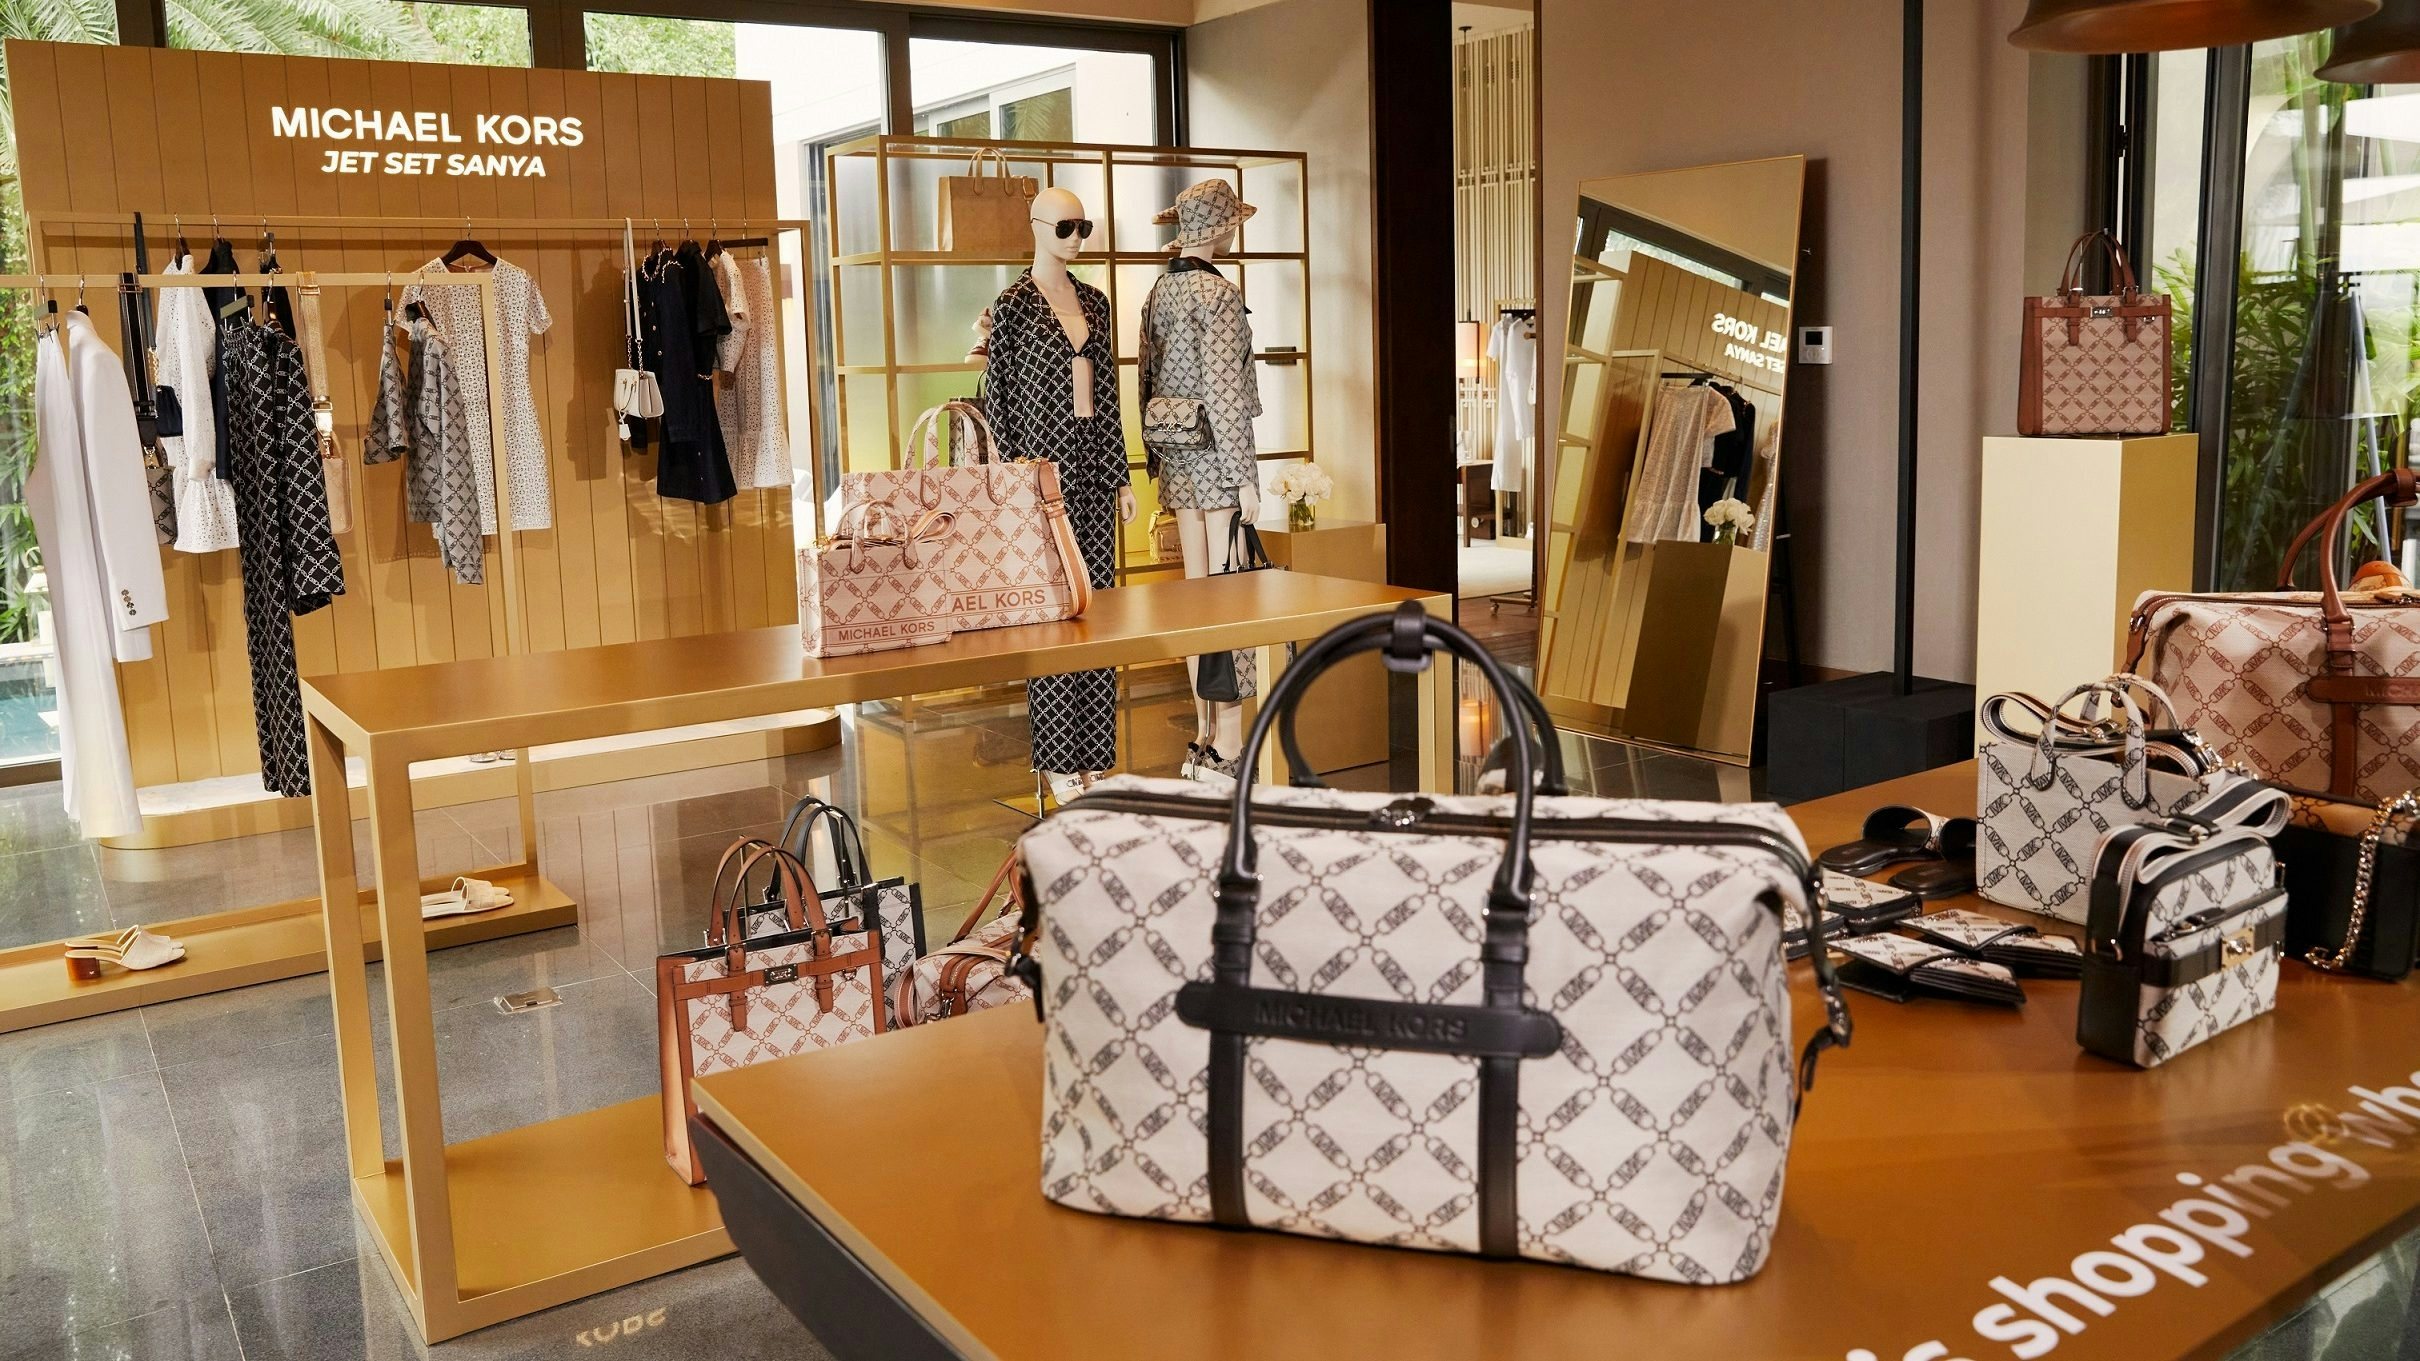 In a sign of growing confidence in China, international luxury brand executives are beating a path to the country’s door following the lifting of travel restrictions. Image: Michael Kors